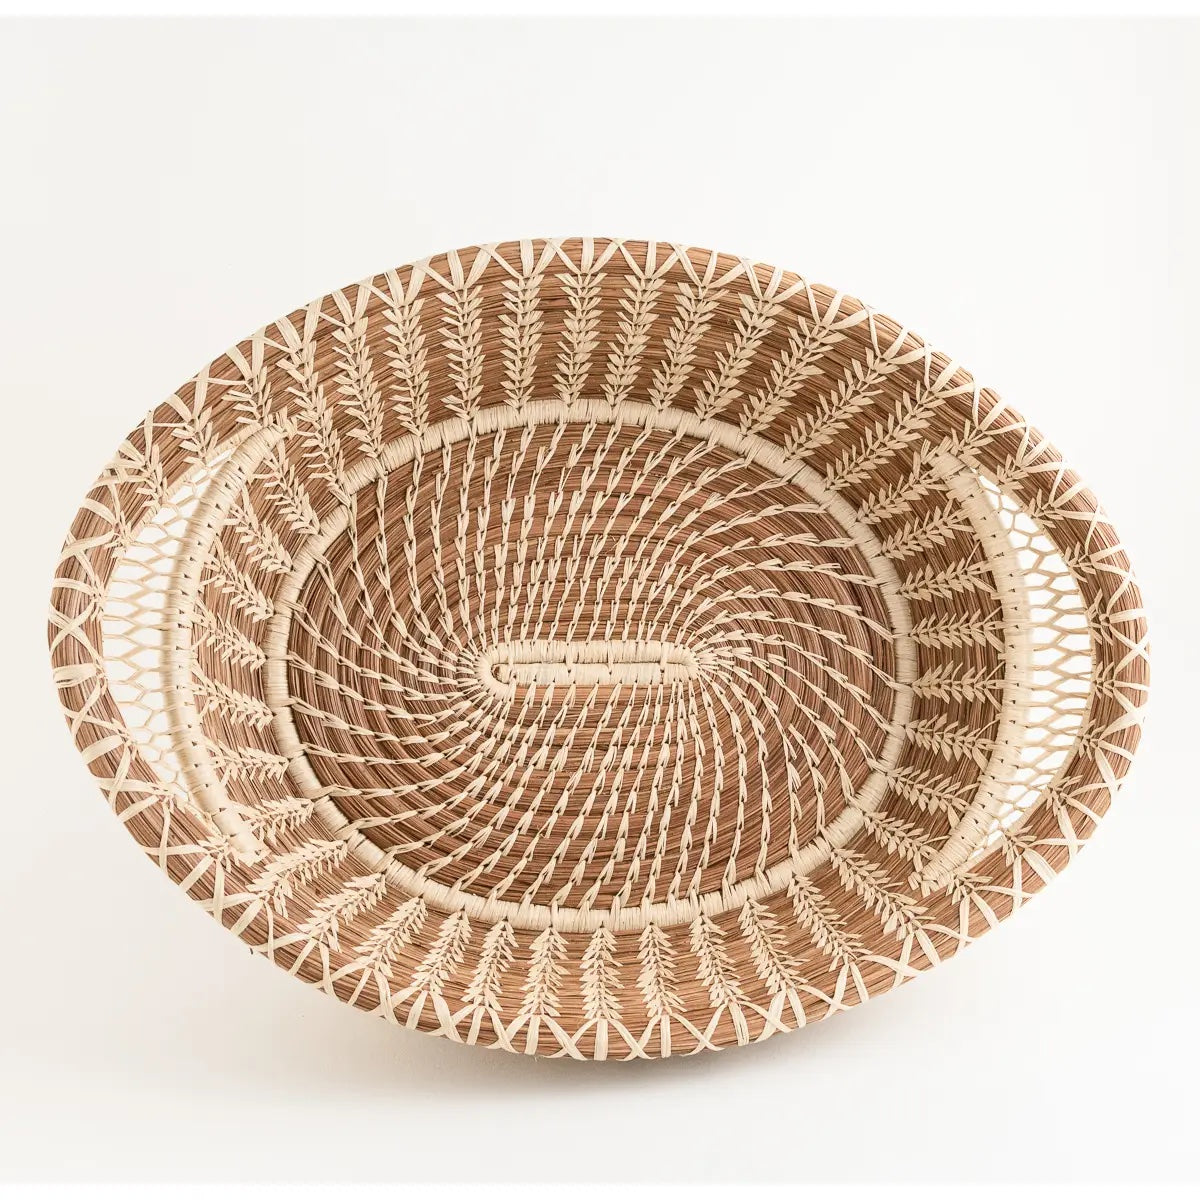 Large elegant pine needle basket features intricate lace-like raffia handles. Made of pine needles and pajón, a native grass found near Lake Atitlán in Guatemala. Handmade and fair trade.